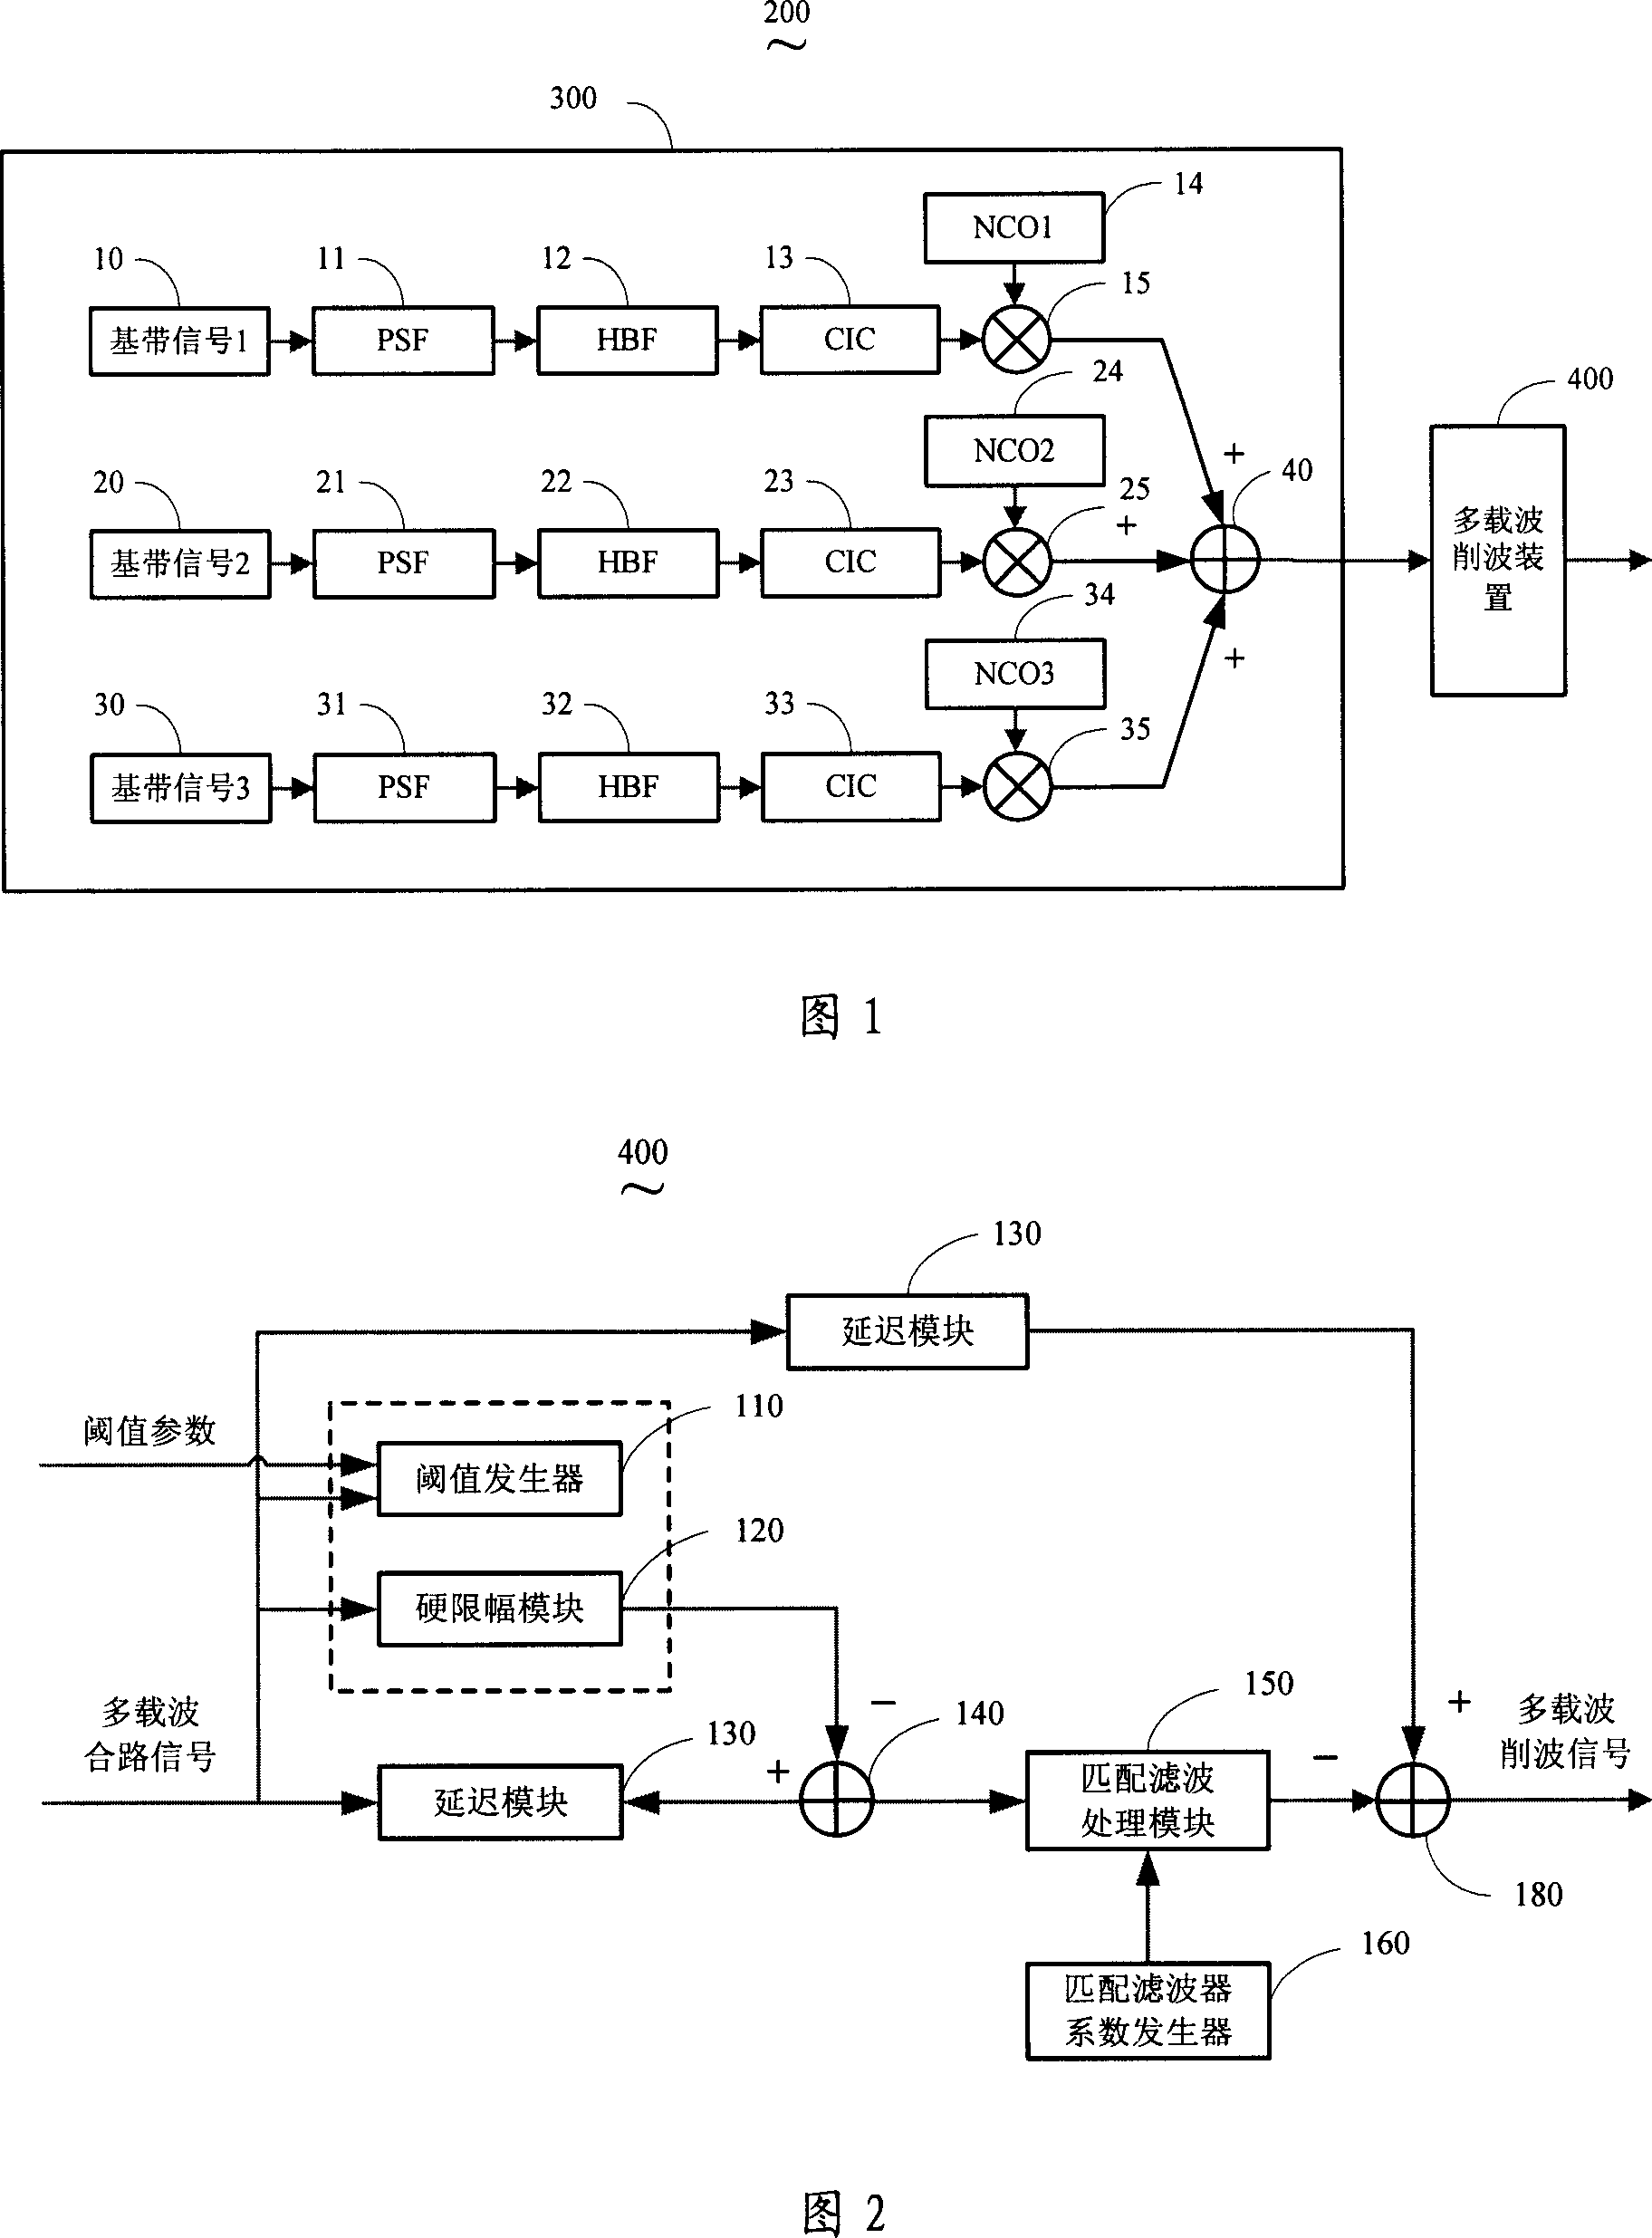 A generation method for multi-carrier signal